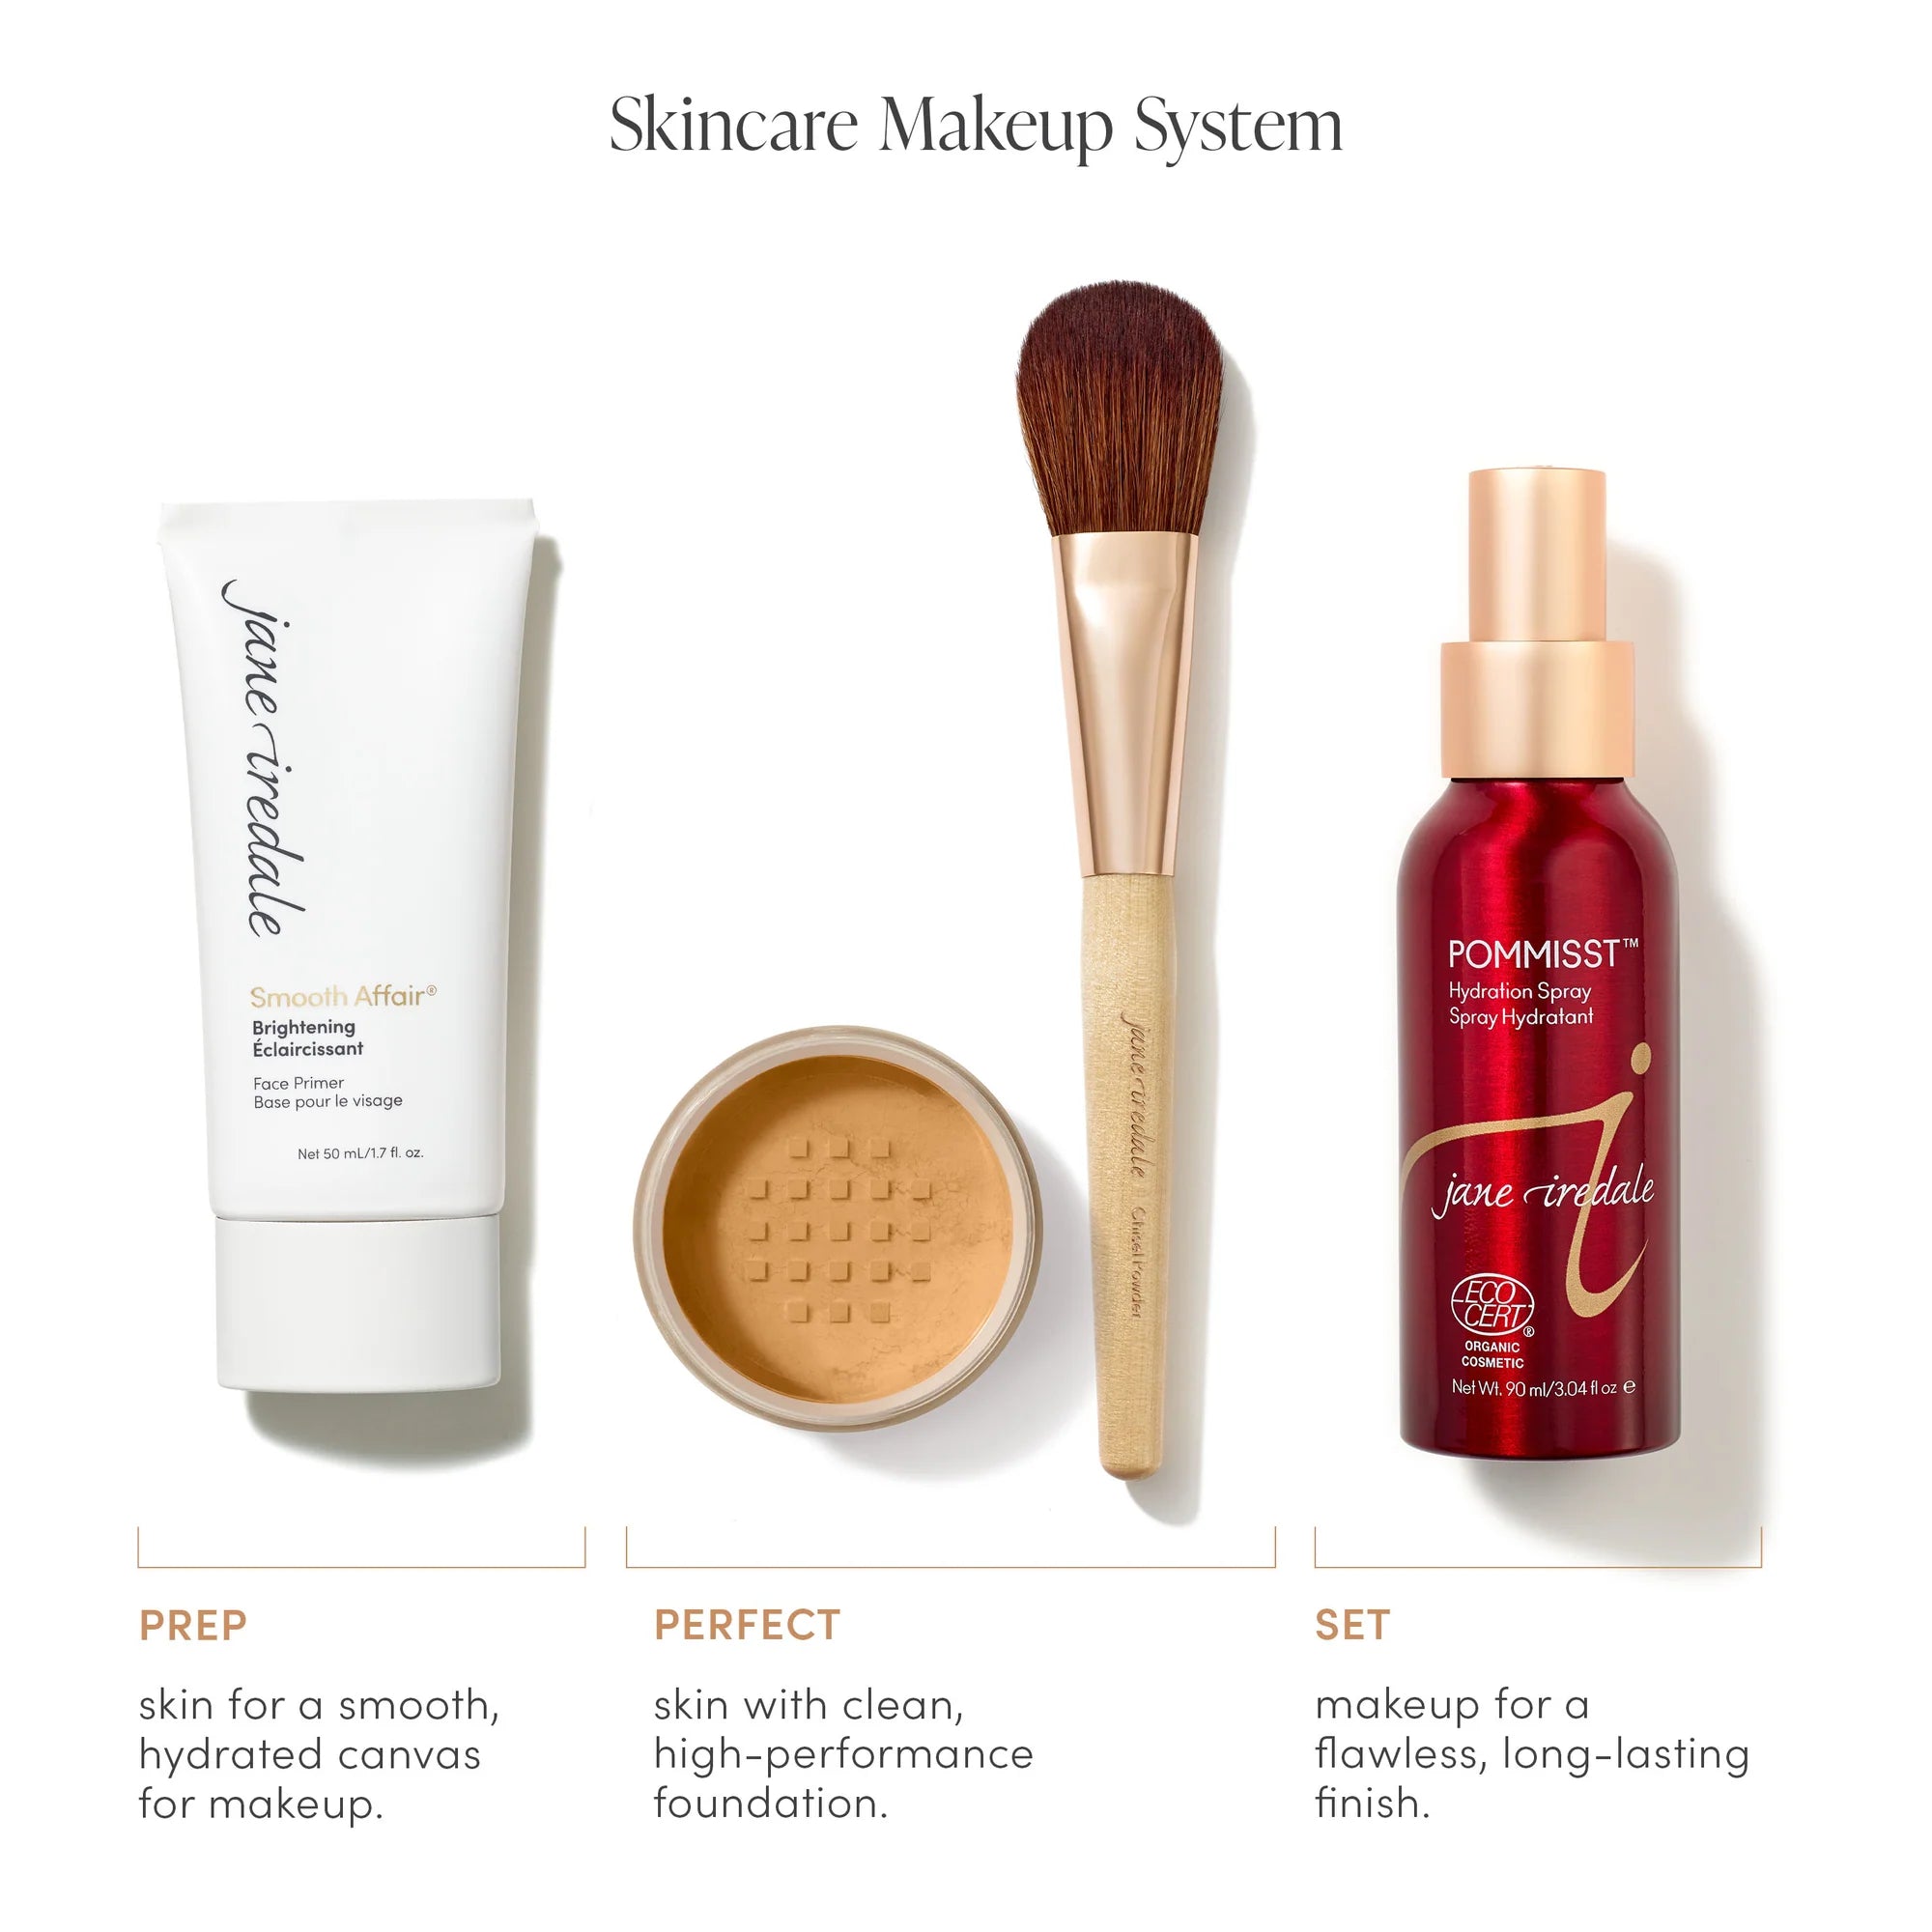 Jane Iredale's chart of what products to use for makeup prep, perfect and set.